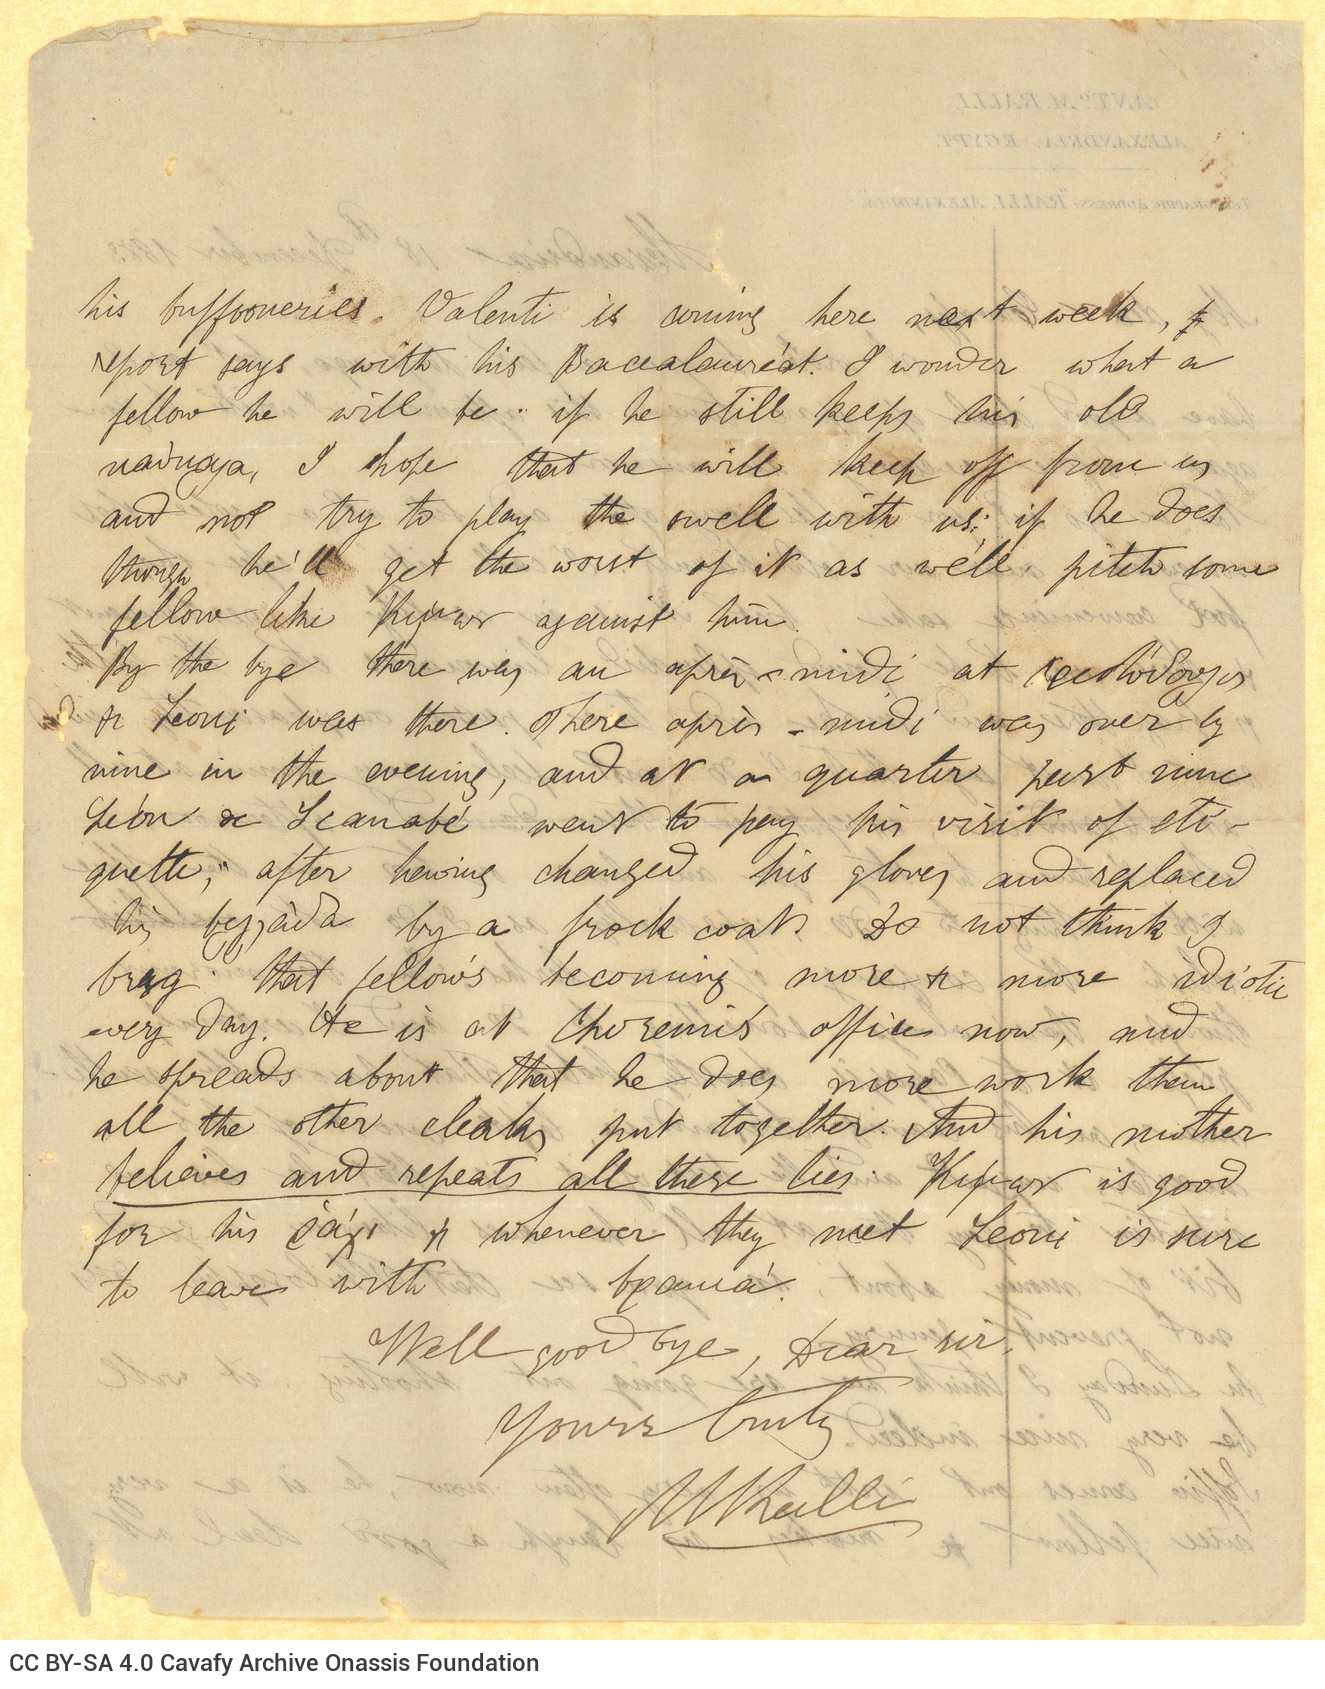 Handwritten letter by Mike Ralli to Cavafy on both sides of a sheet. Description of the author's everyday life on the occasio